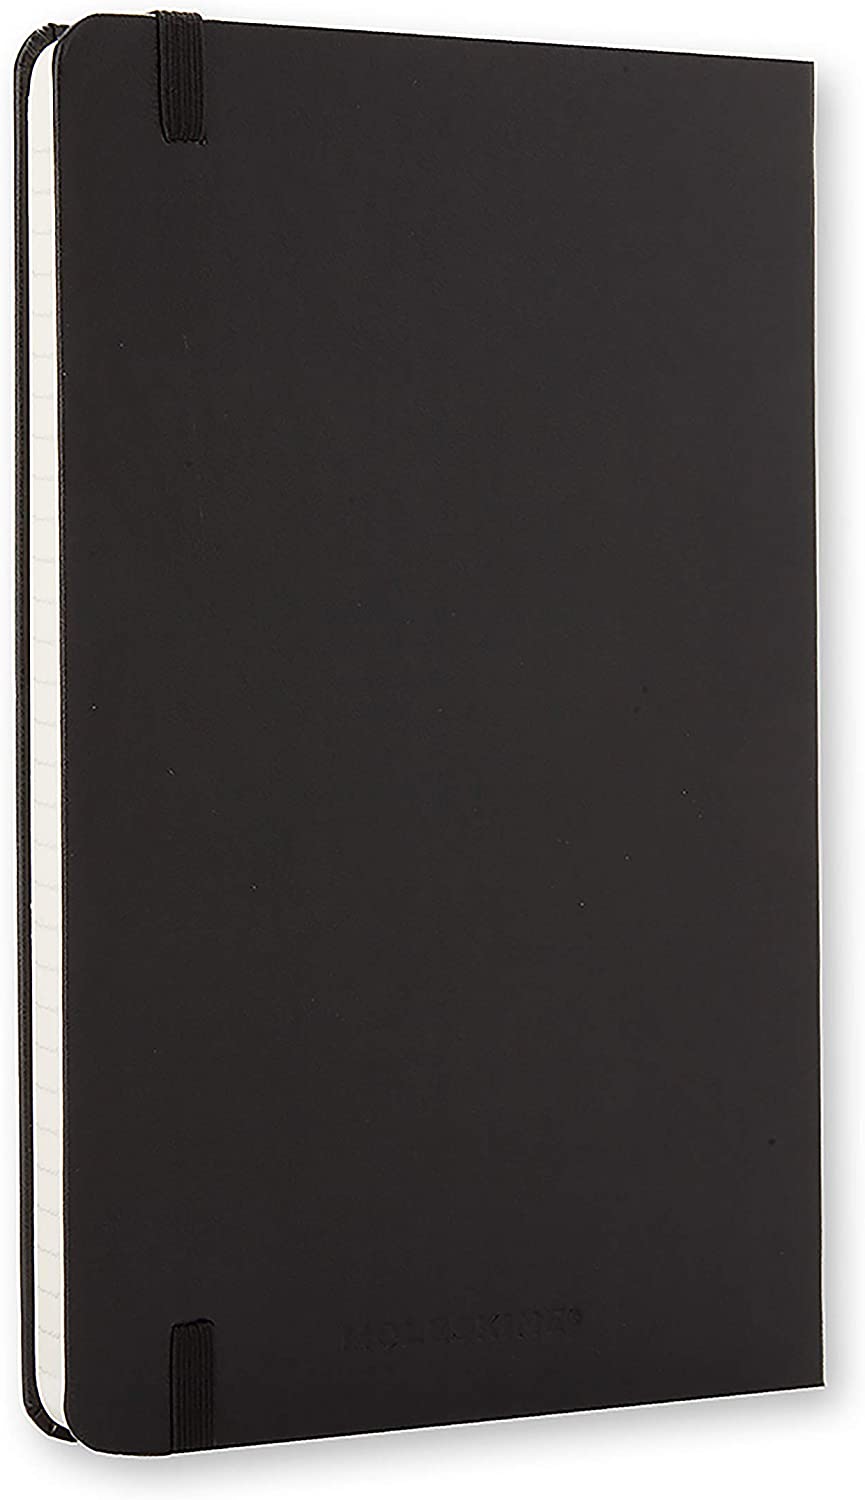 Moleskine - Classic Ruled Paper Notebook - Hard Cover and Elastic Closure Journal - Color Black - Size Large 13 x 21 A5 - 240 Pages